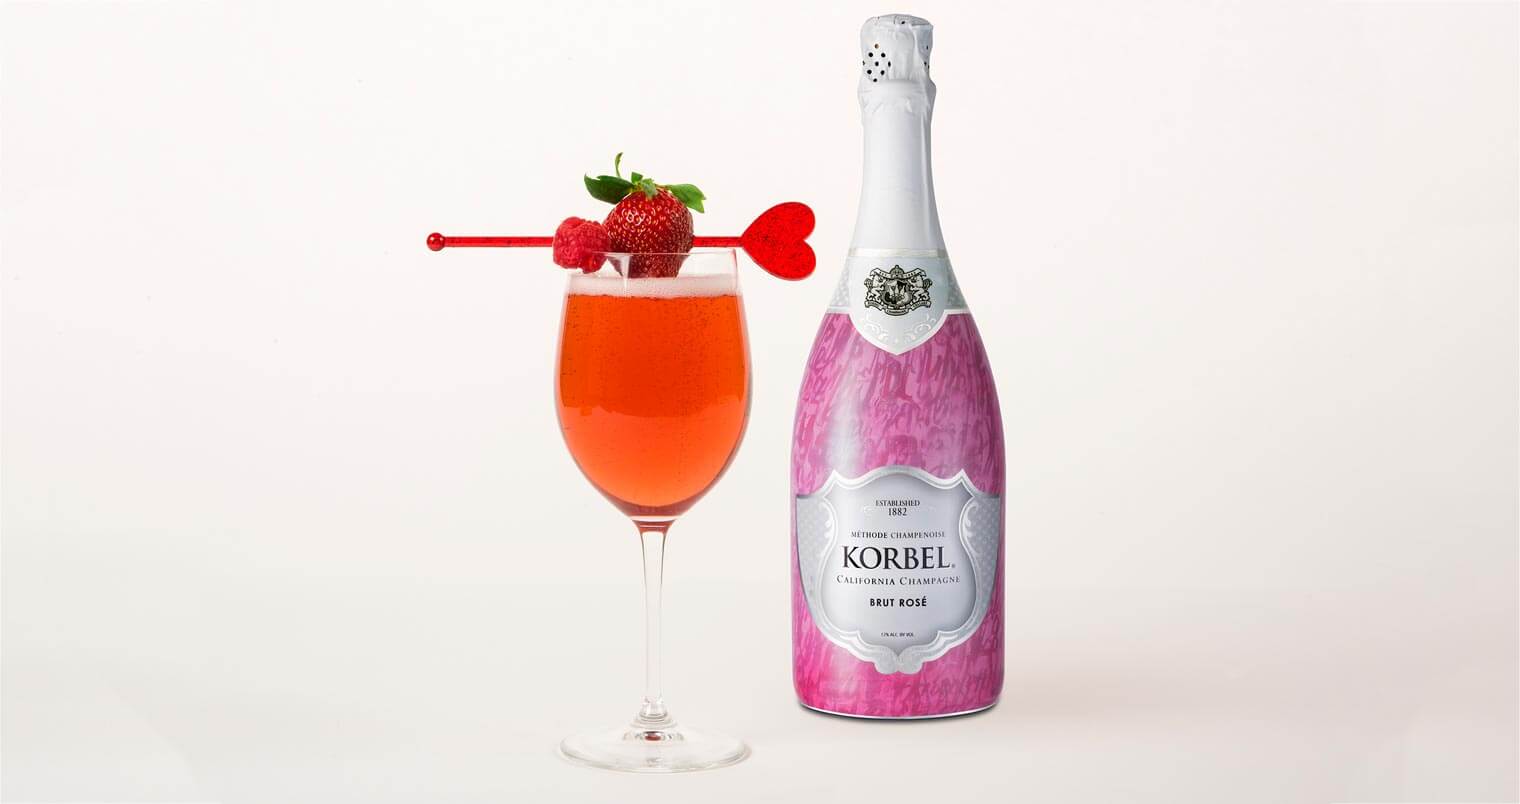 Korbel Ruby Rose, cocktail and bottle on light background, featured image